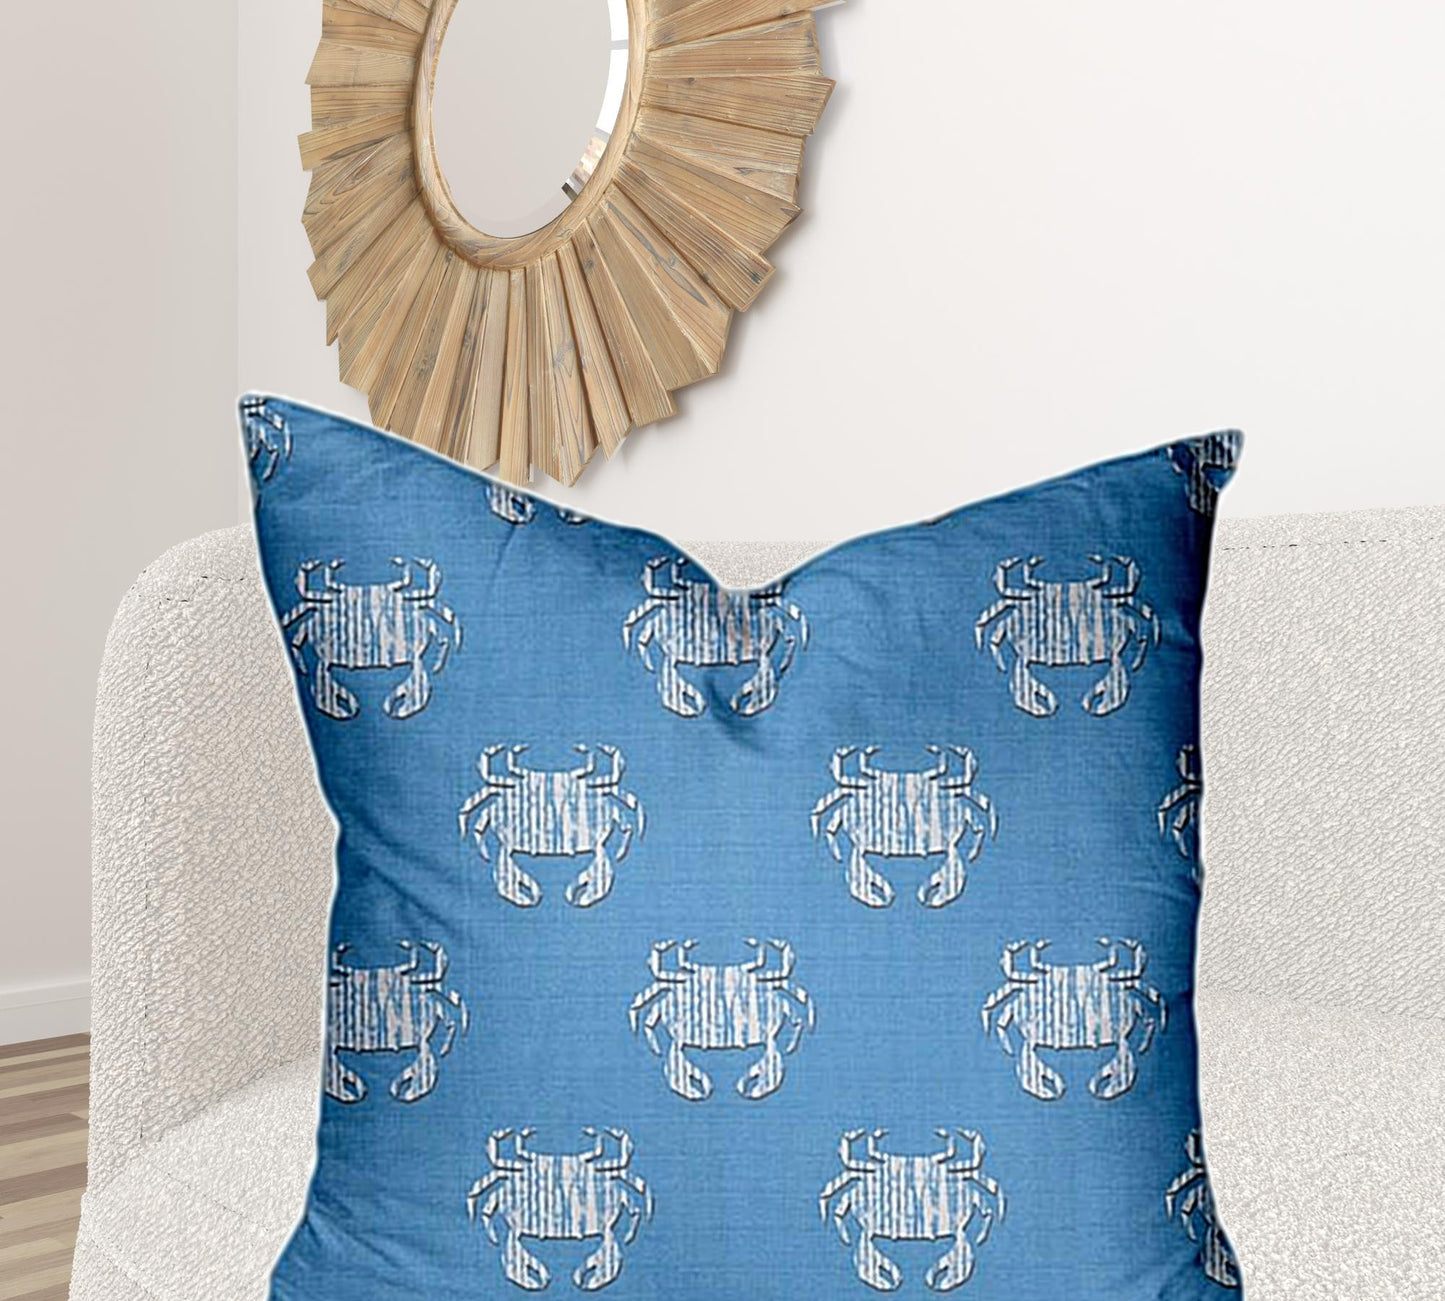 36" X 36" Blue And White Crab Enveloped Coastal Throw Indoor Outdoor Pillow Cover